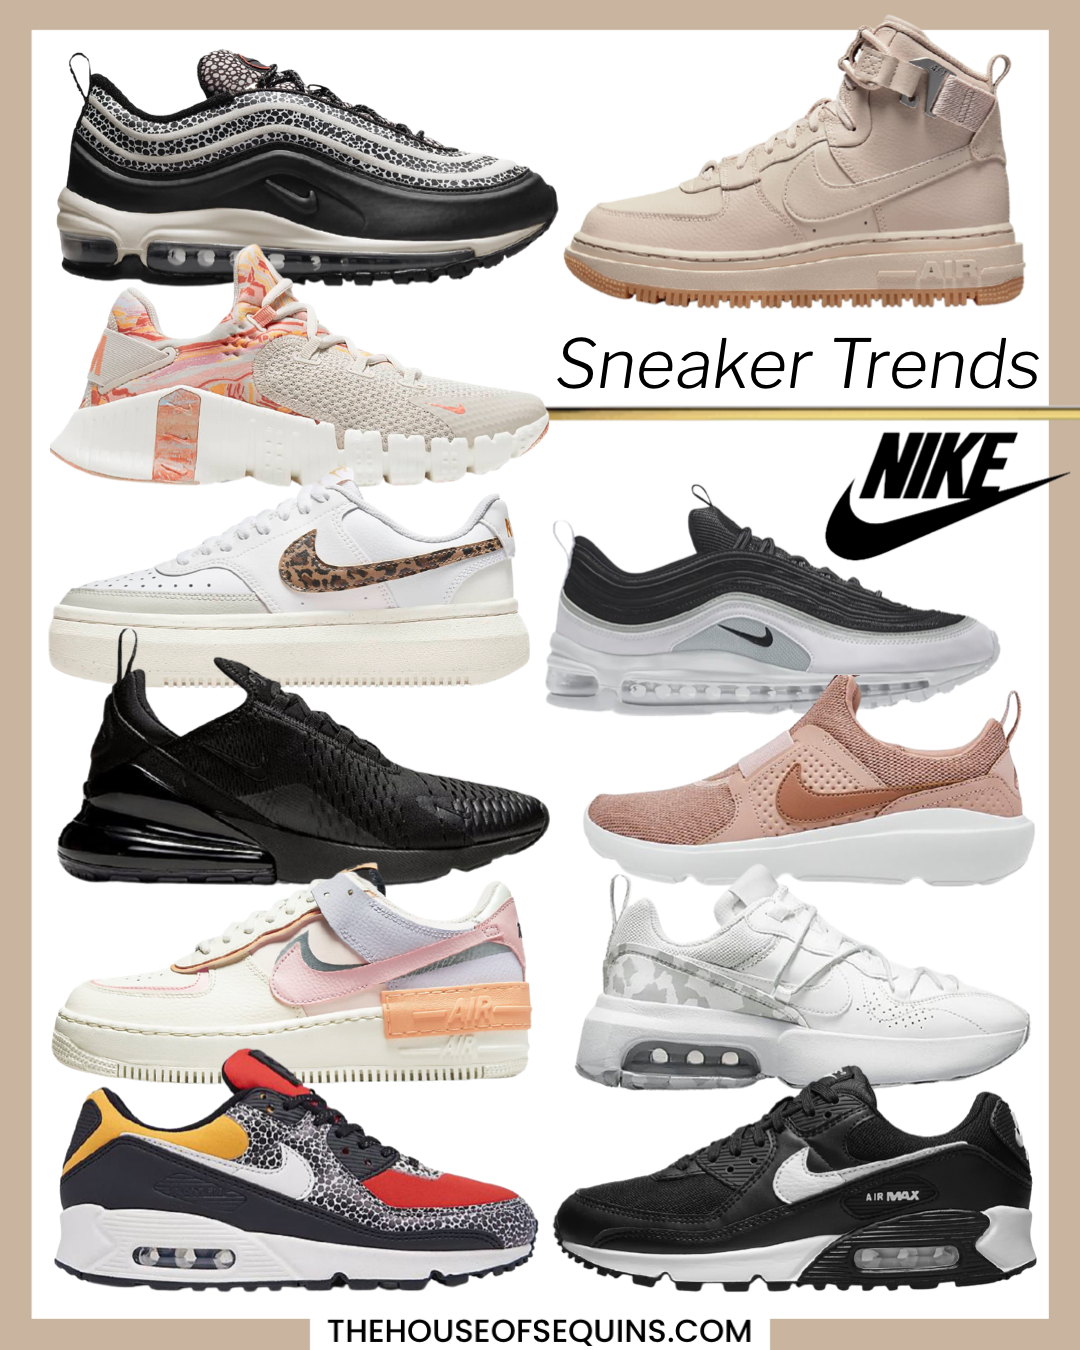 Blogger Sarah Lindner of The House of Sequins sharing the latest Nike sneaker and Adidas sneaker trends.